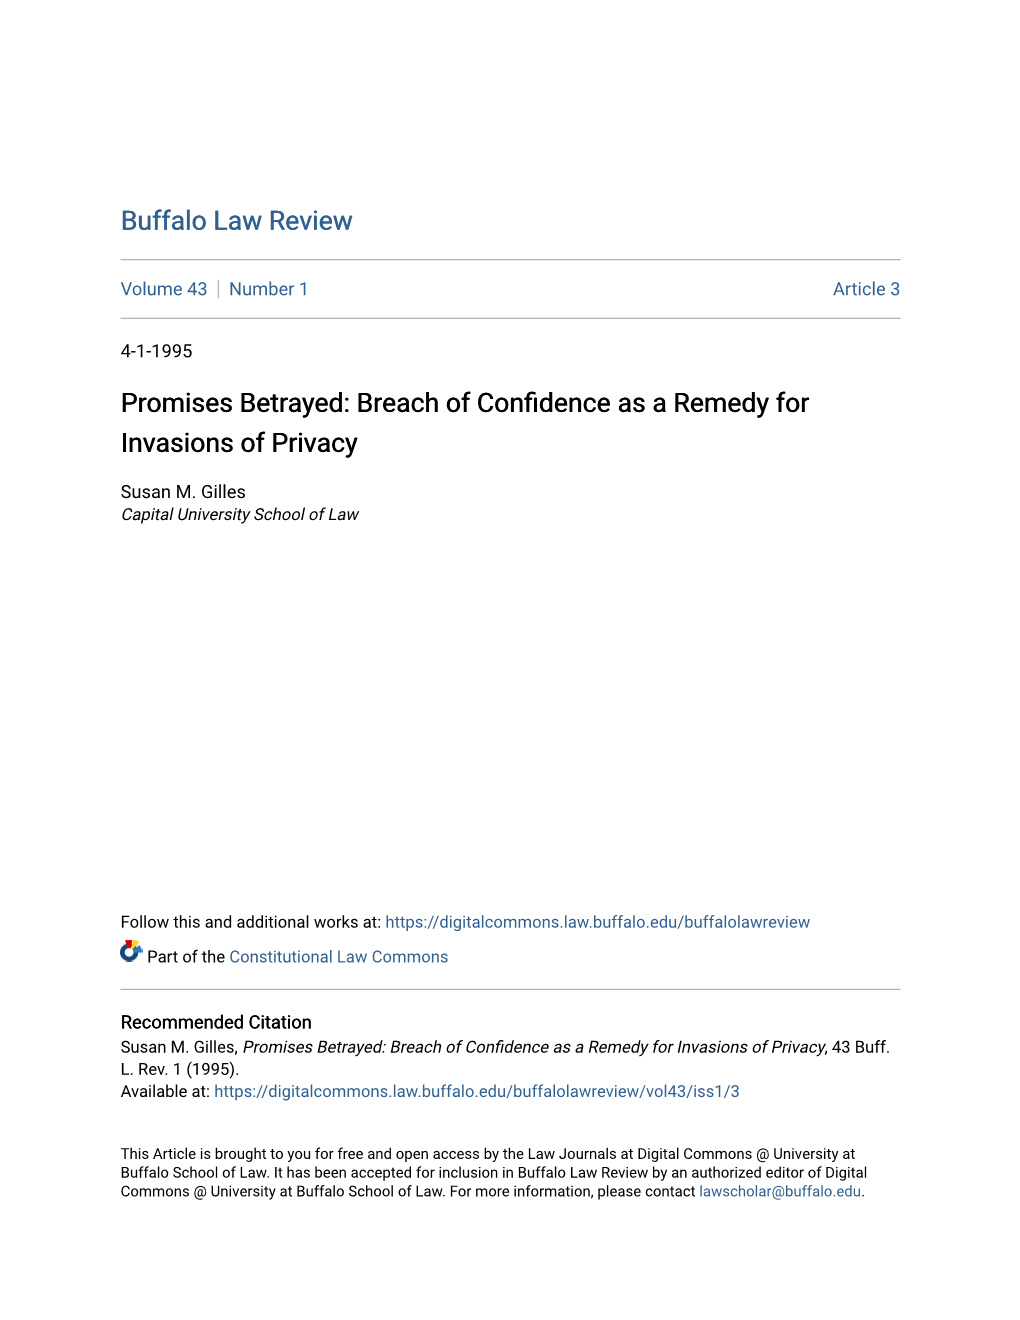 Promises Betrayed: Breach of Confidence As a Remedy for Invasions of Privacy